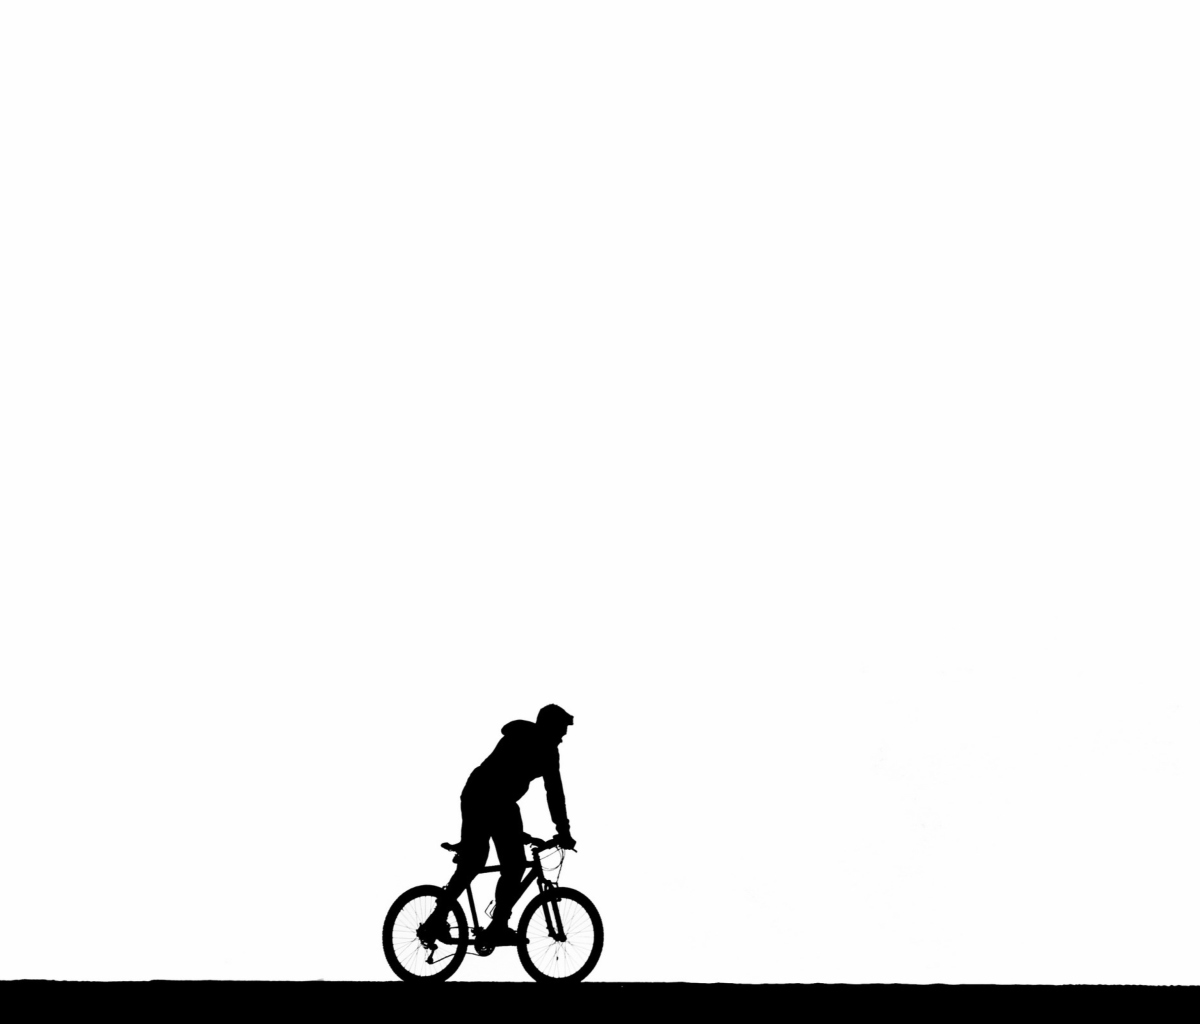 Bicycle Silhouette wallpaper 1200x1024